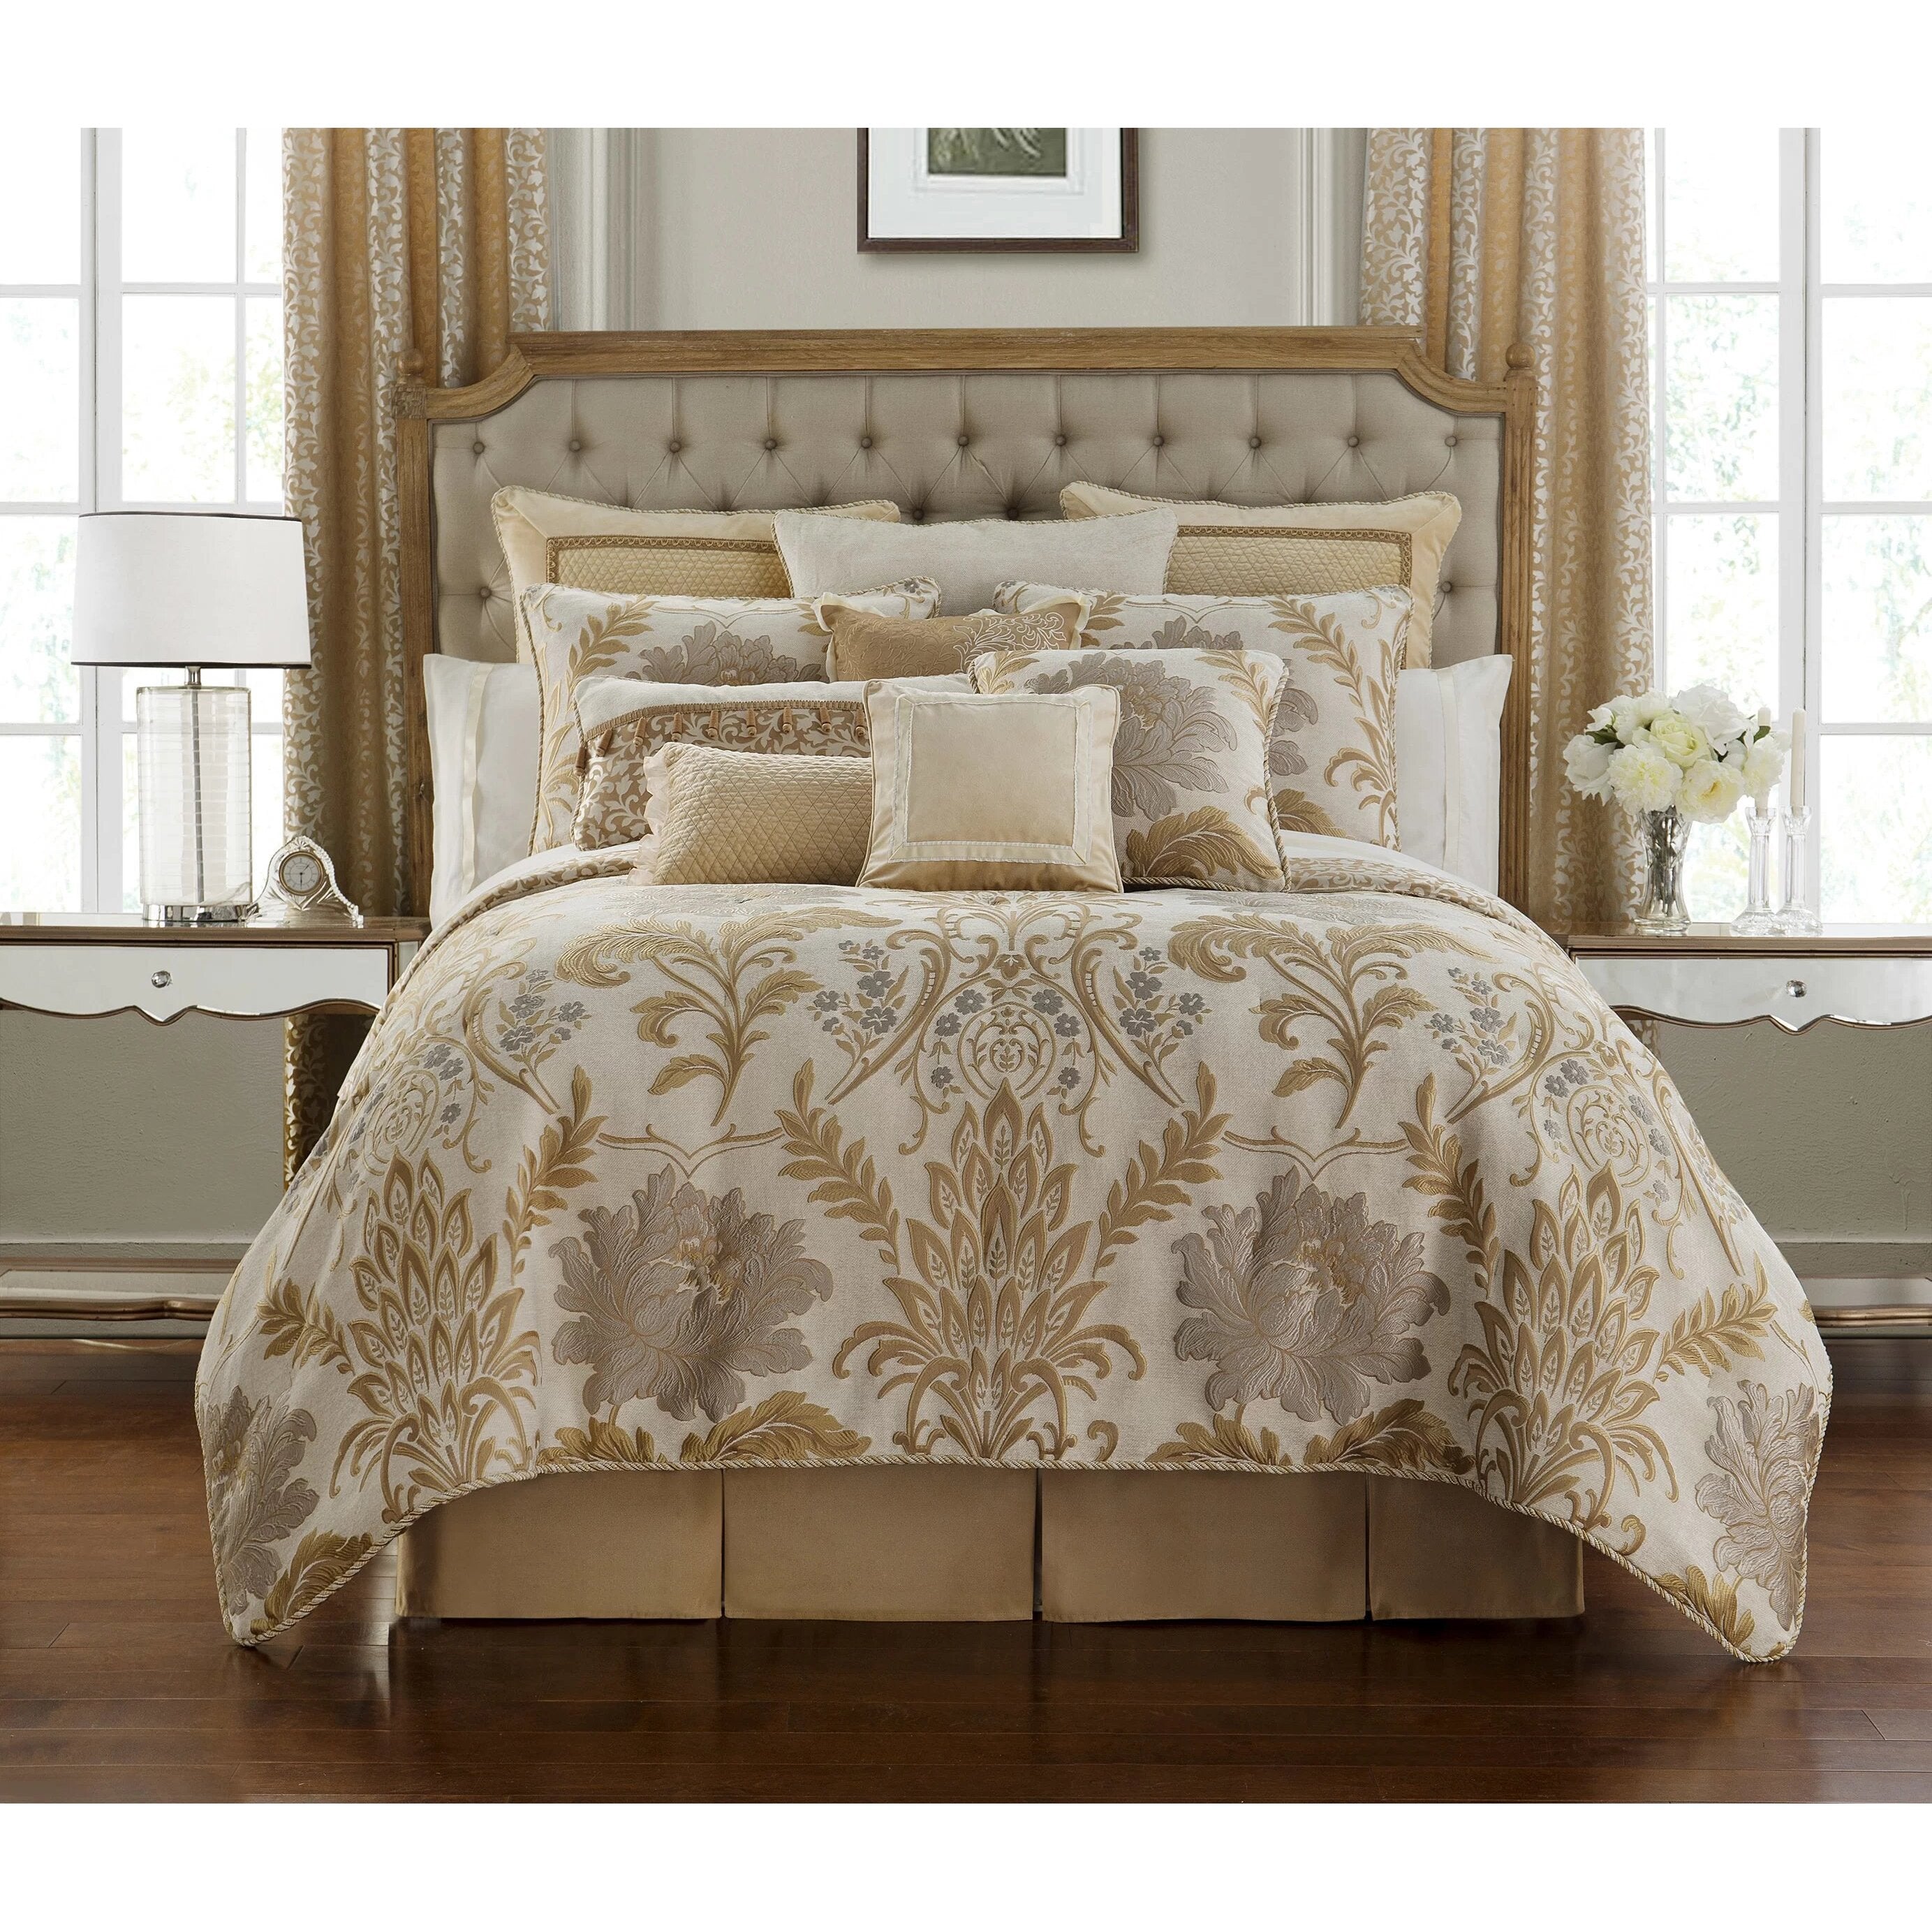 Ansonia Ivory 4 Piece Reversible Comforter Set By Waterford